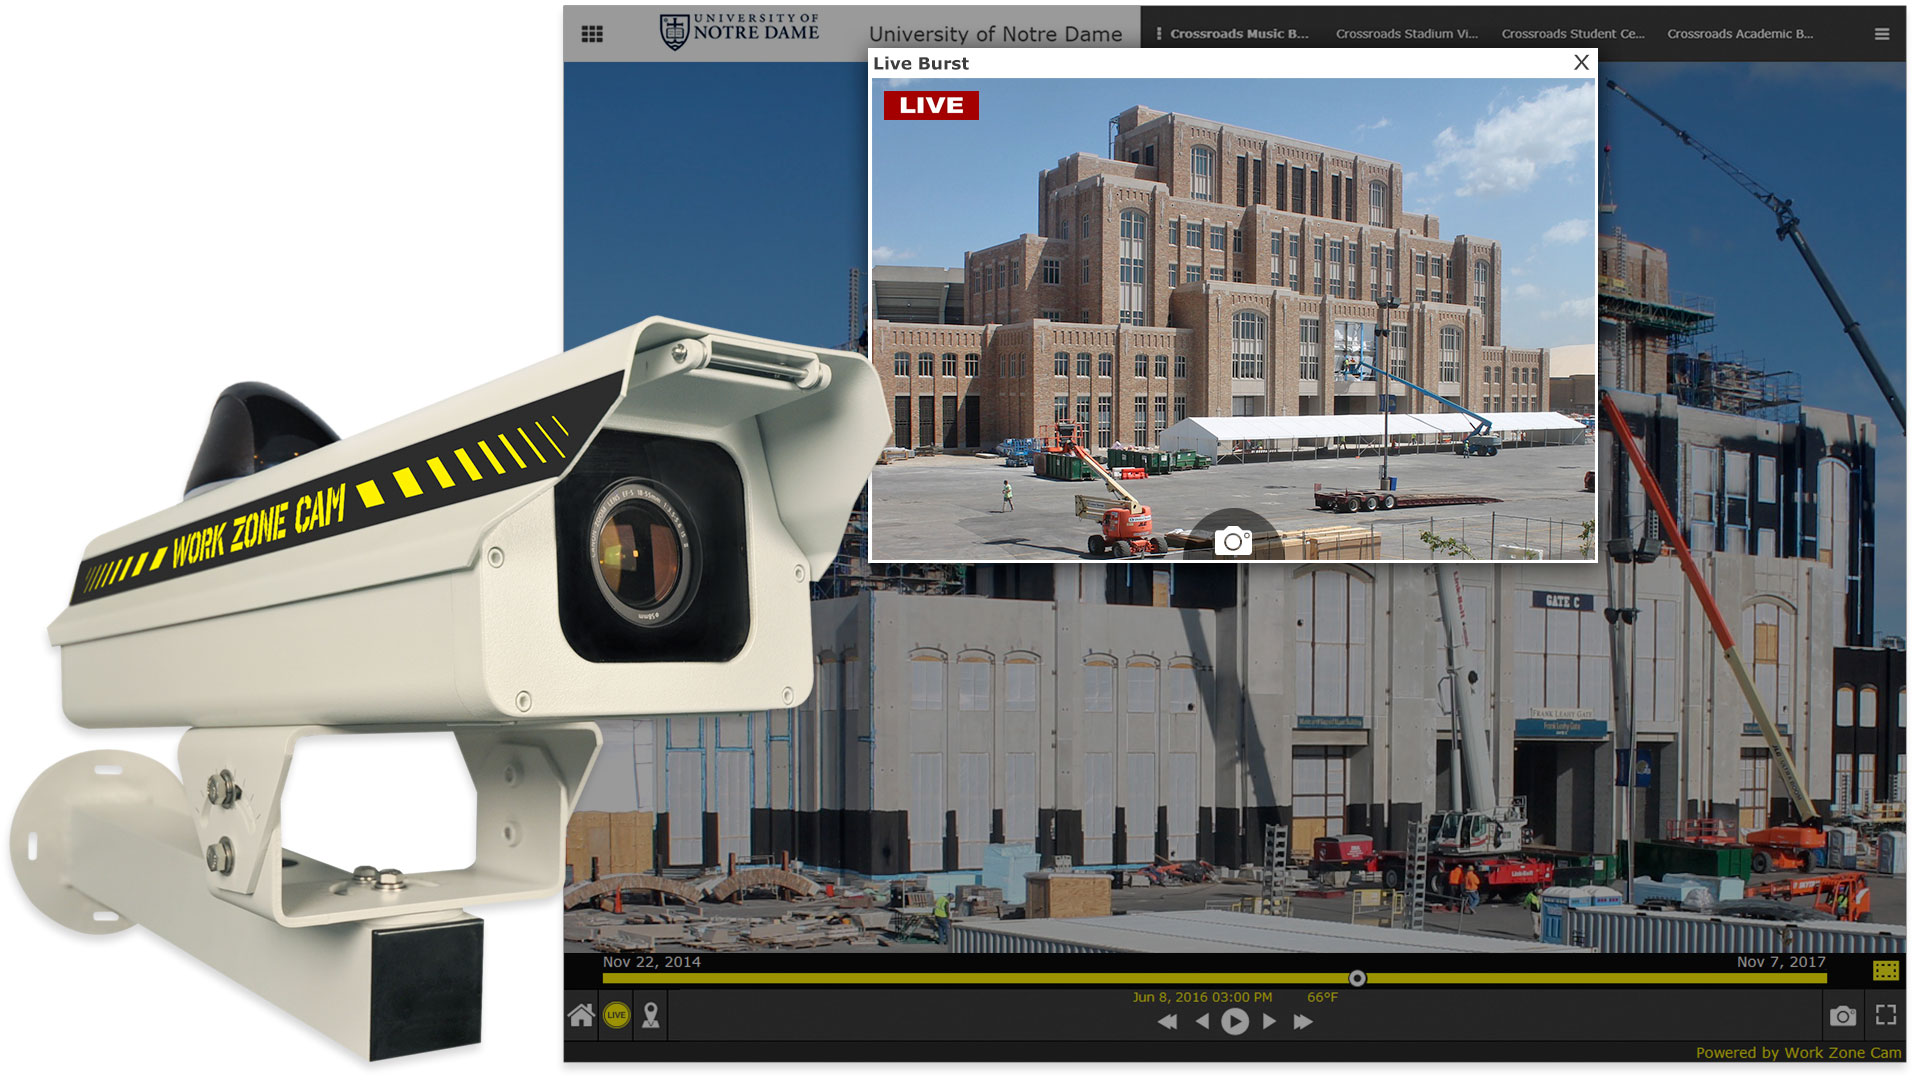 Available for rental or purchase, the new Work Zone Cam features 18 megapixel imagery and live video.